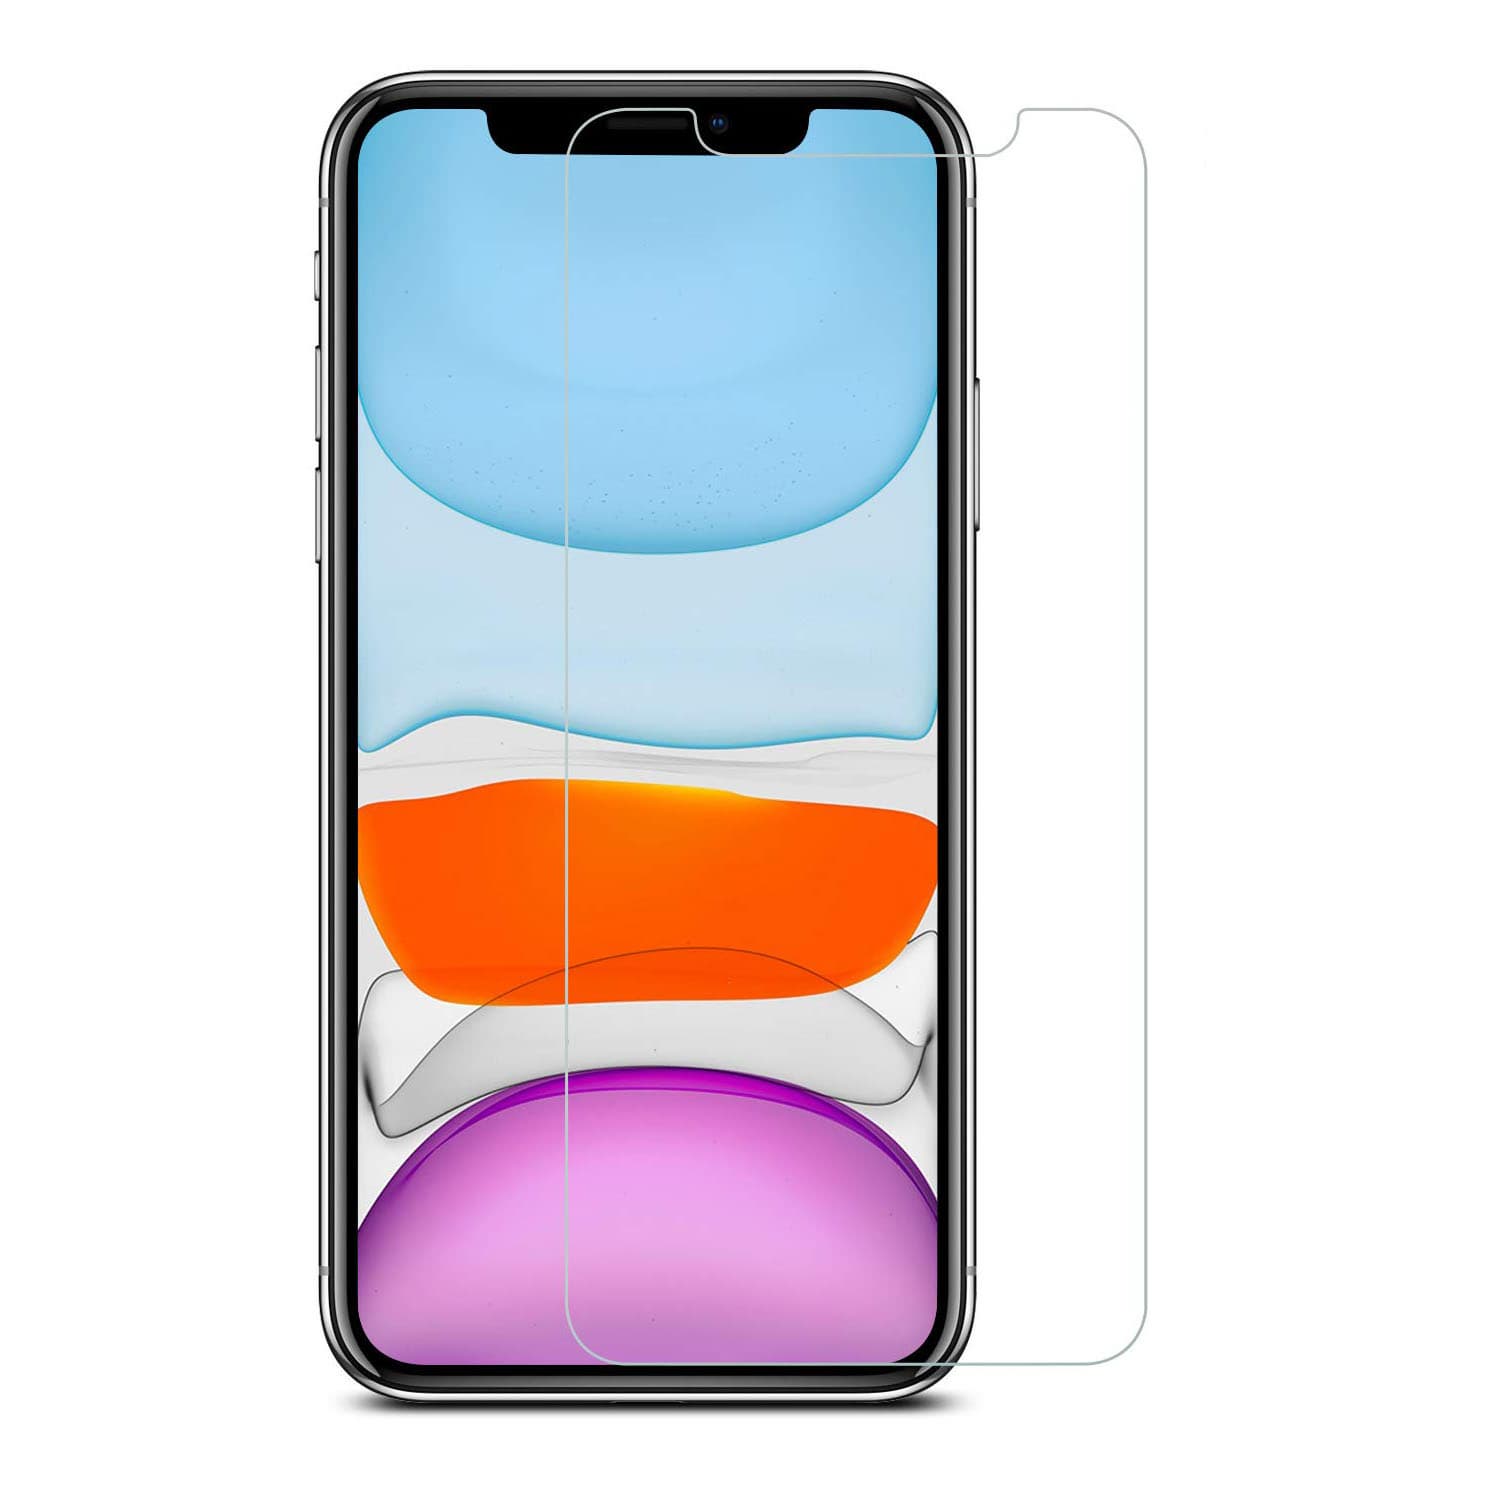 2_5D High clear tempered glass screen protector for iPhone11